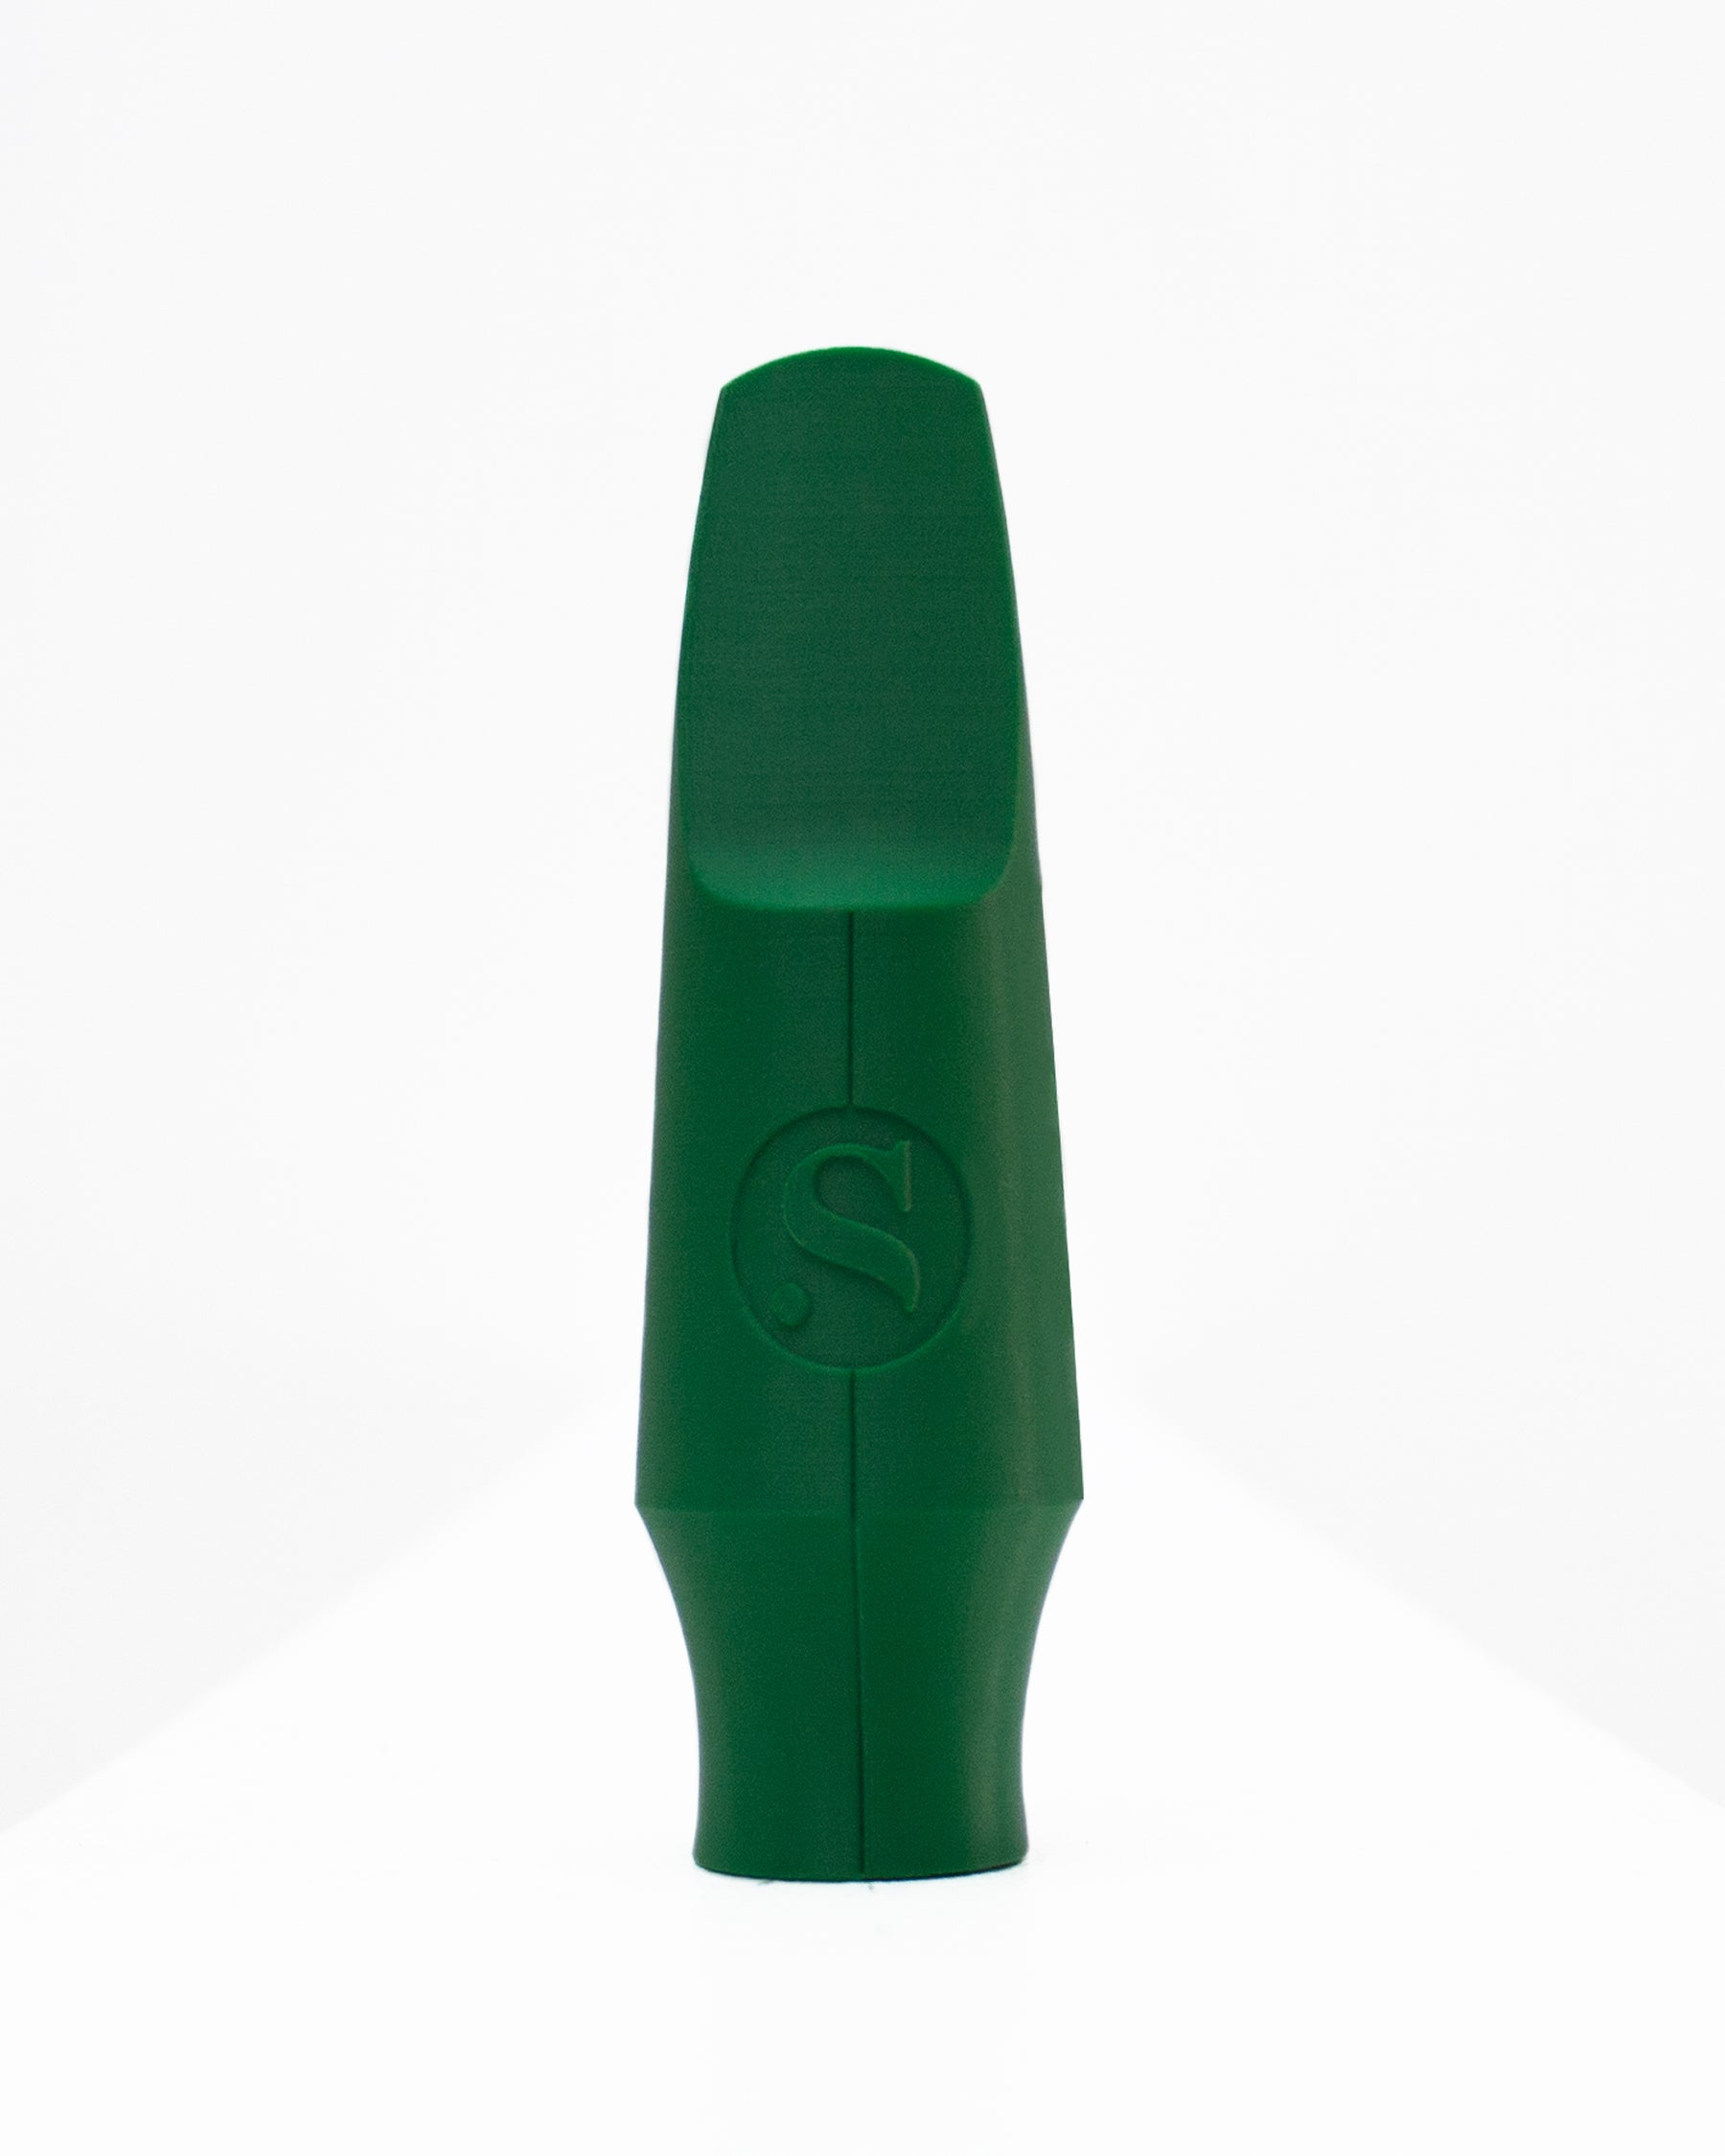 Tenor Signature Saxophone mouthpiece - Scott Paddock by Syos - 9 / Forest Green